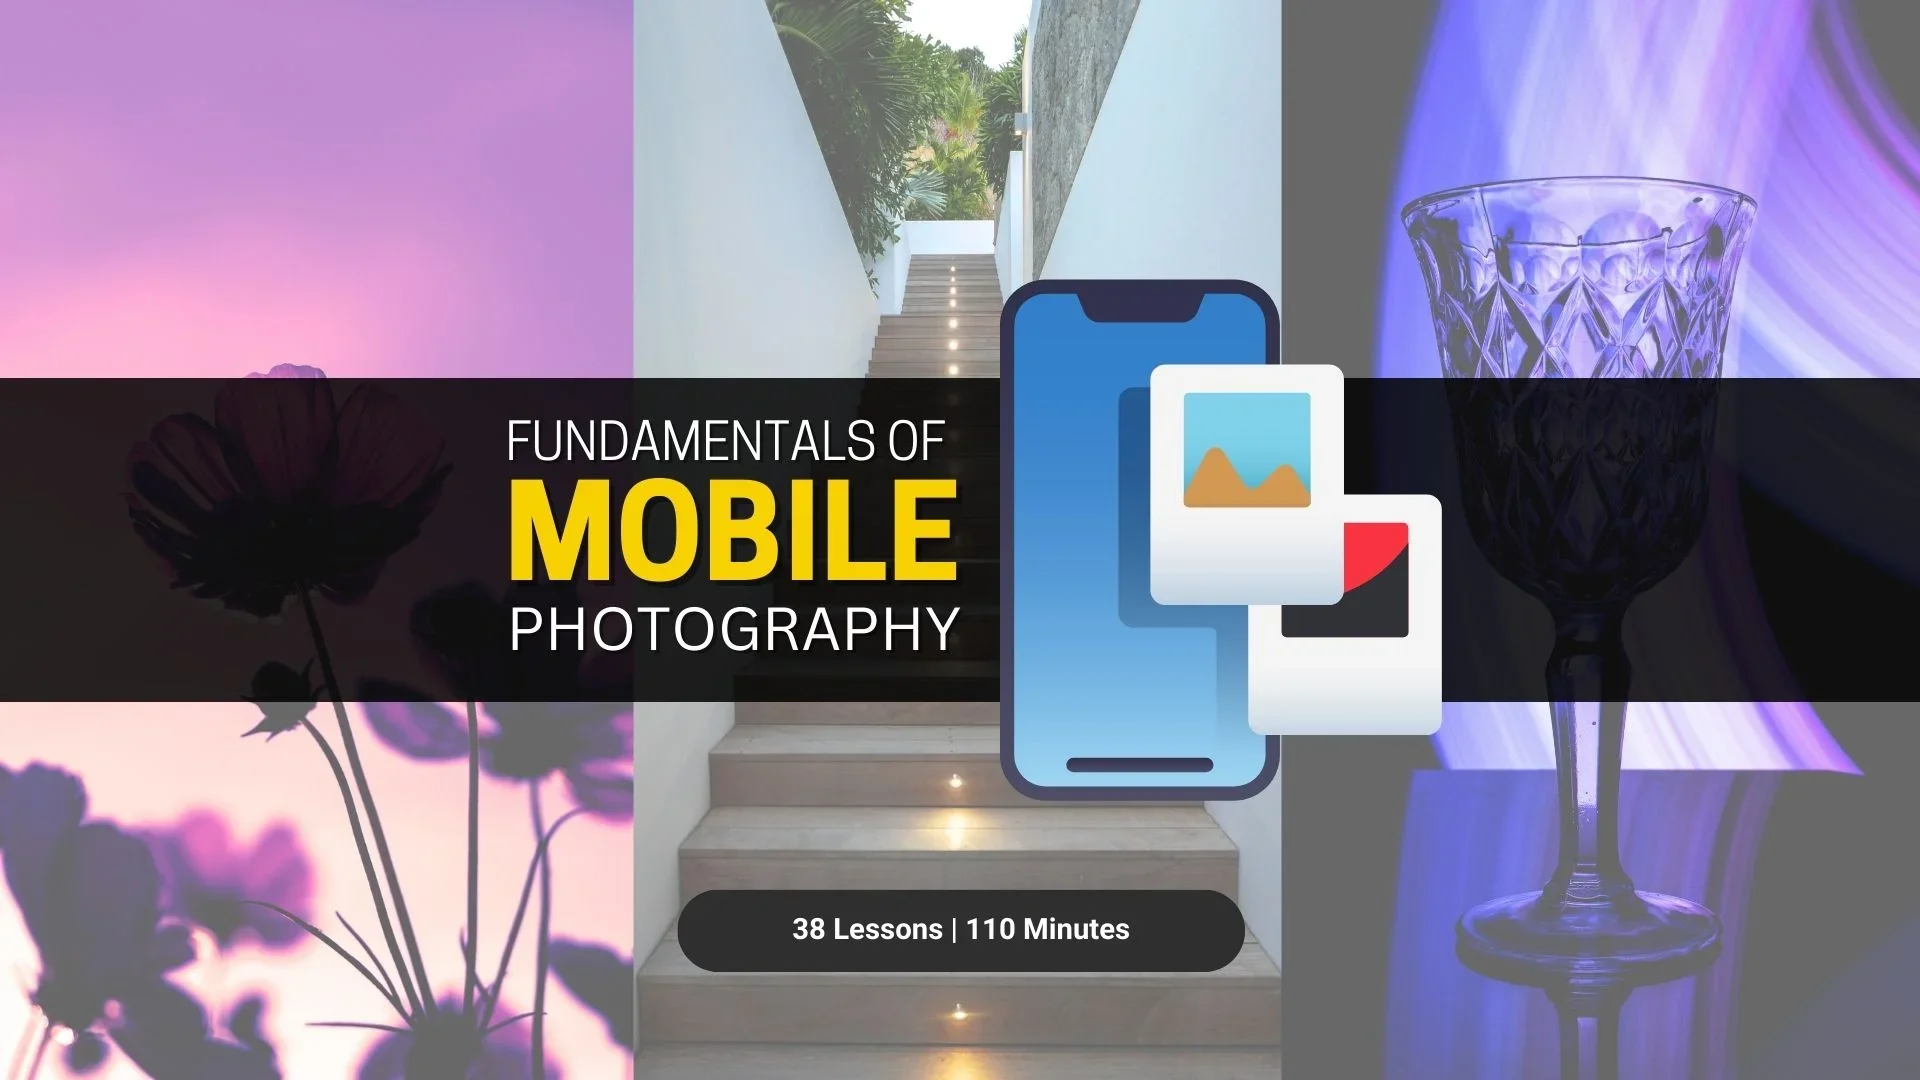 Fundamentals of Mobile Photography